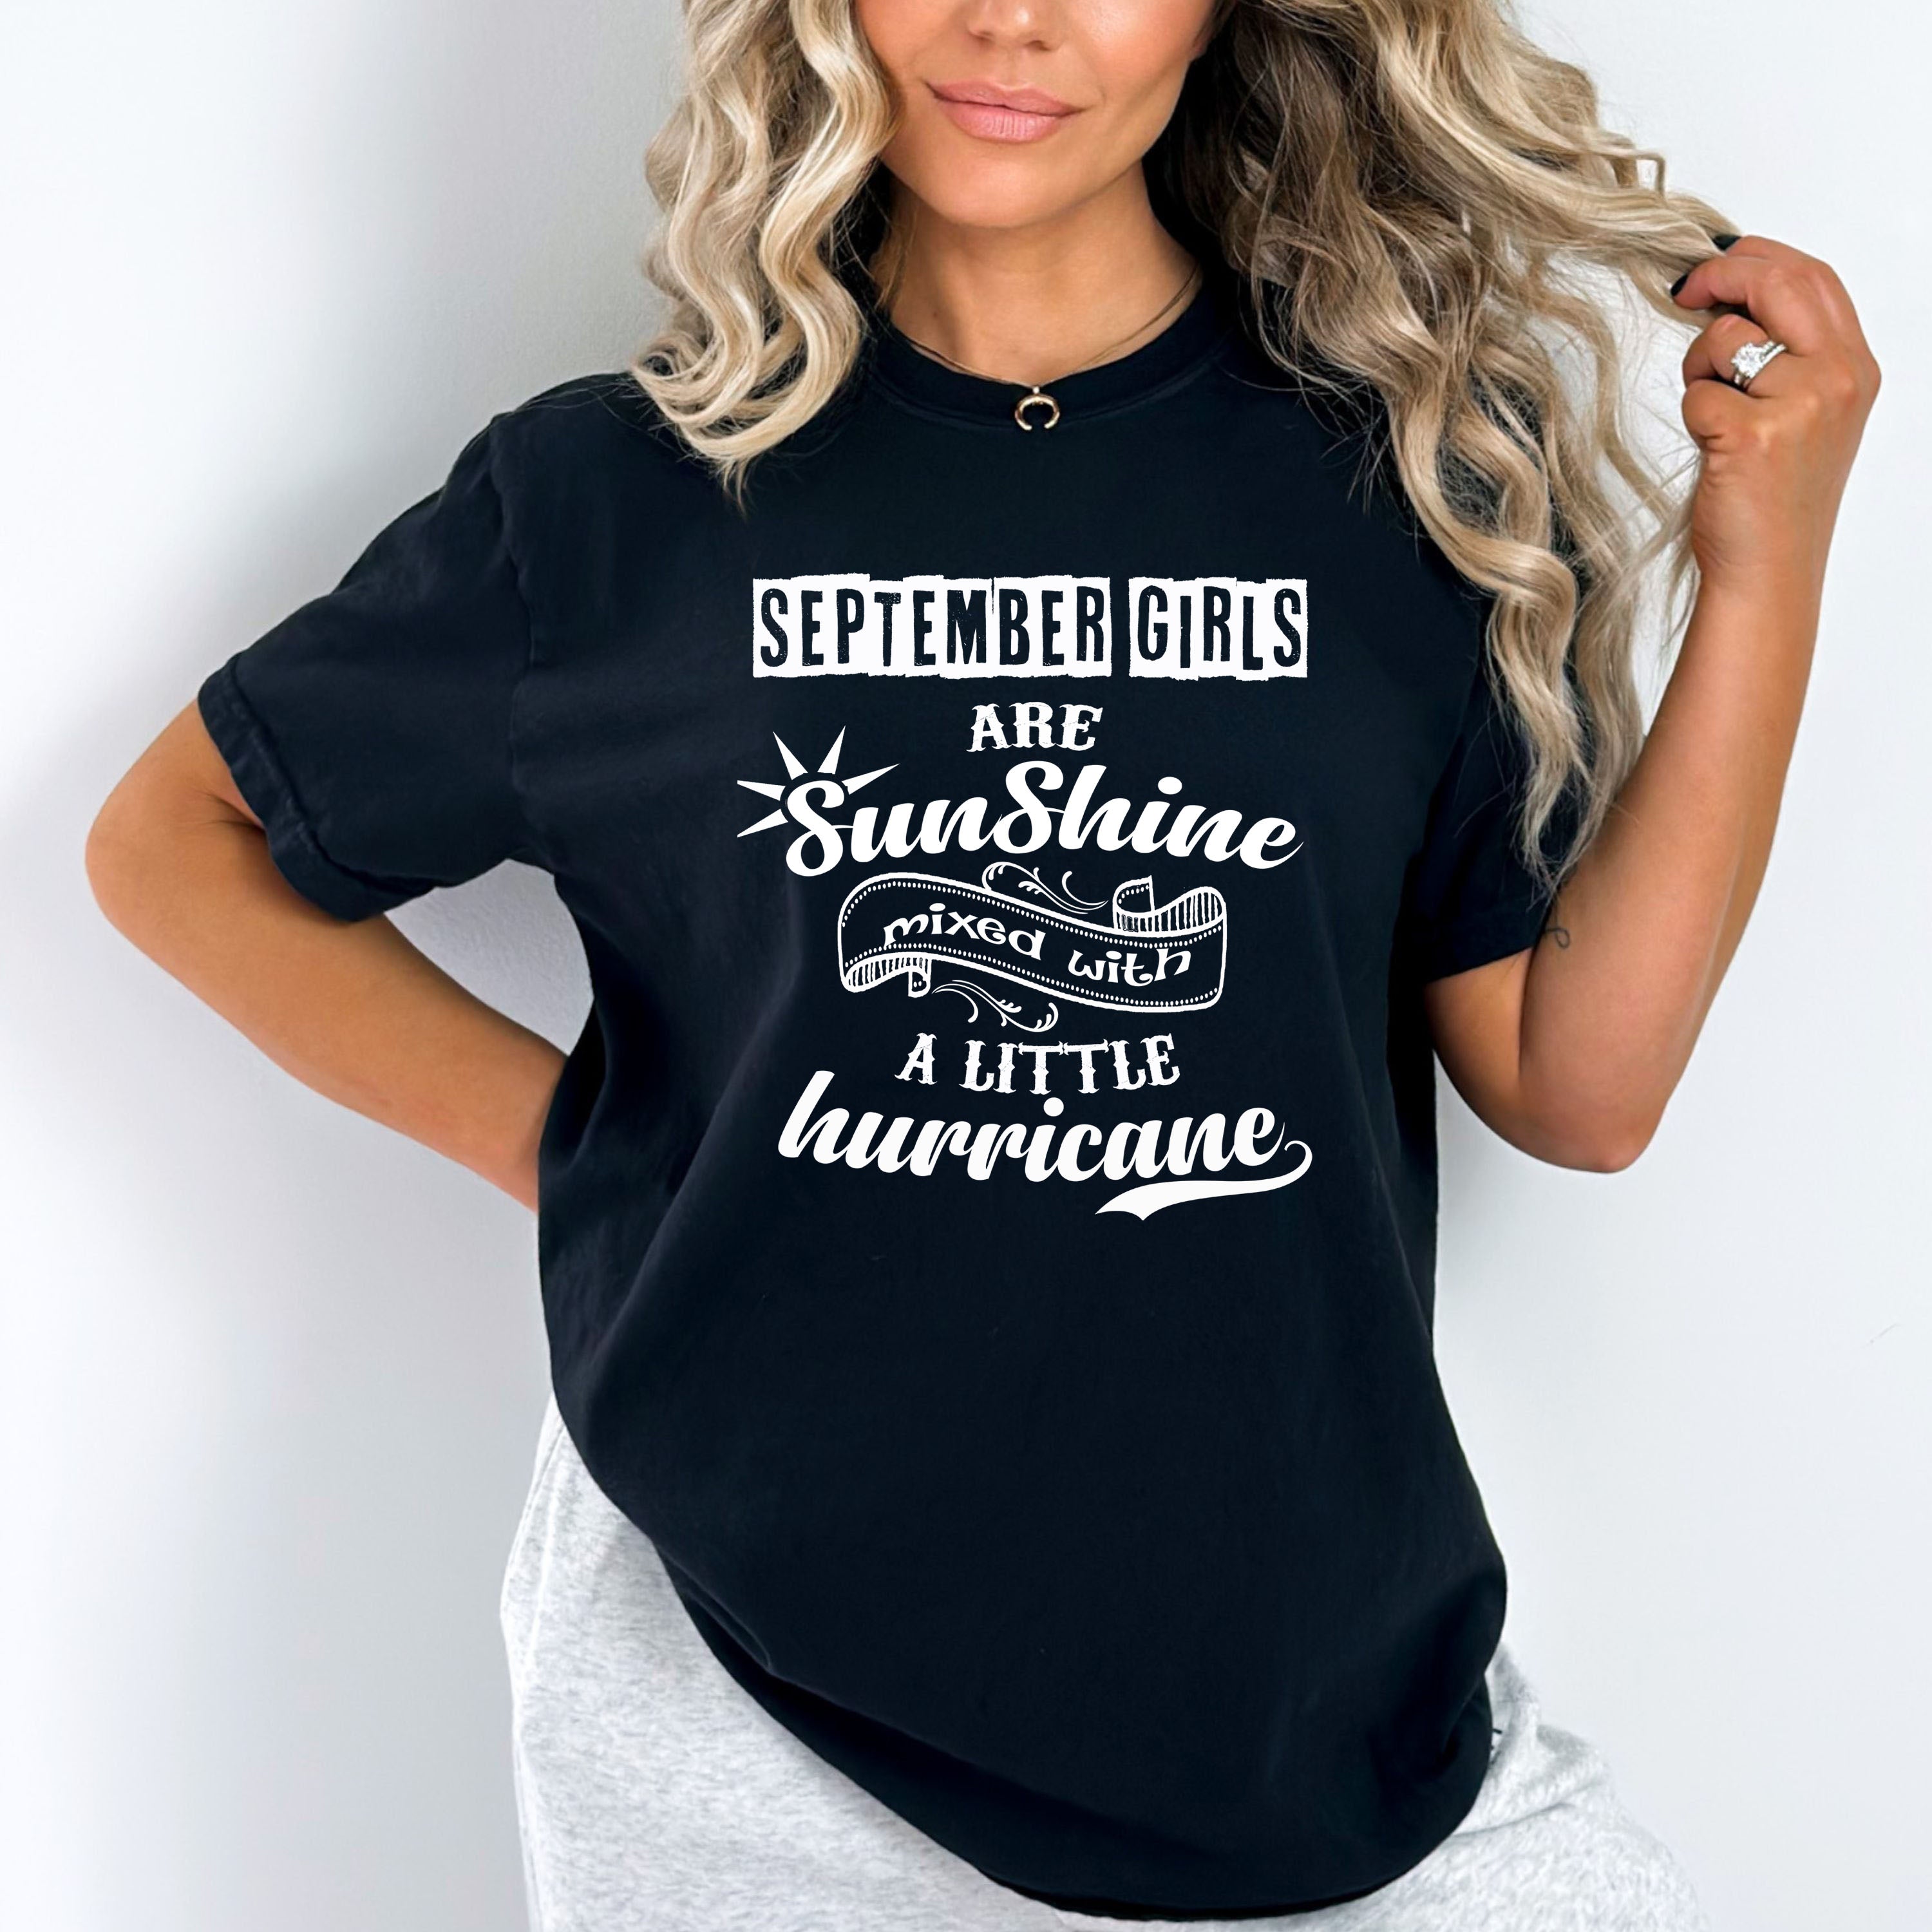 "September Girls Are Sunshine Mixed With Hurricane" Buy All Colors. Save Shipping.